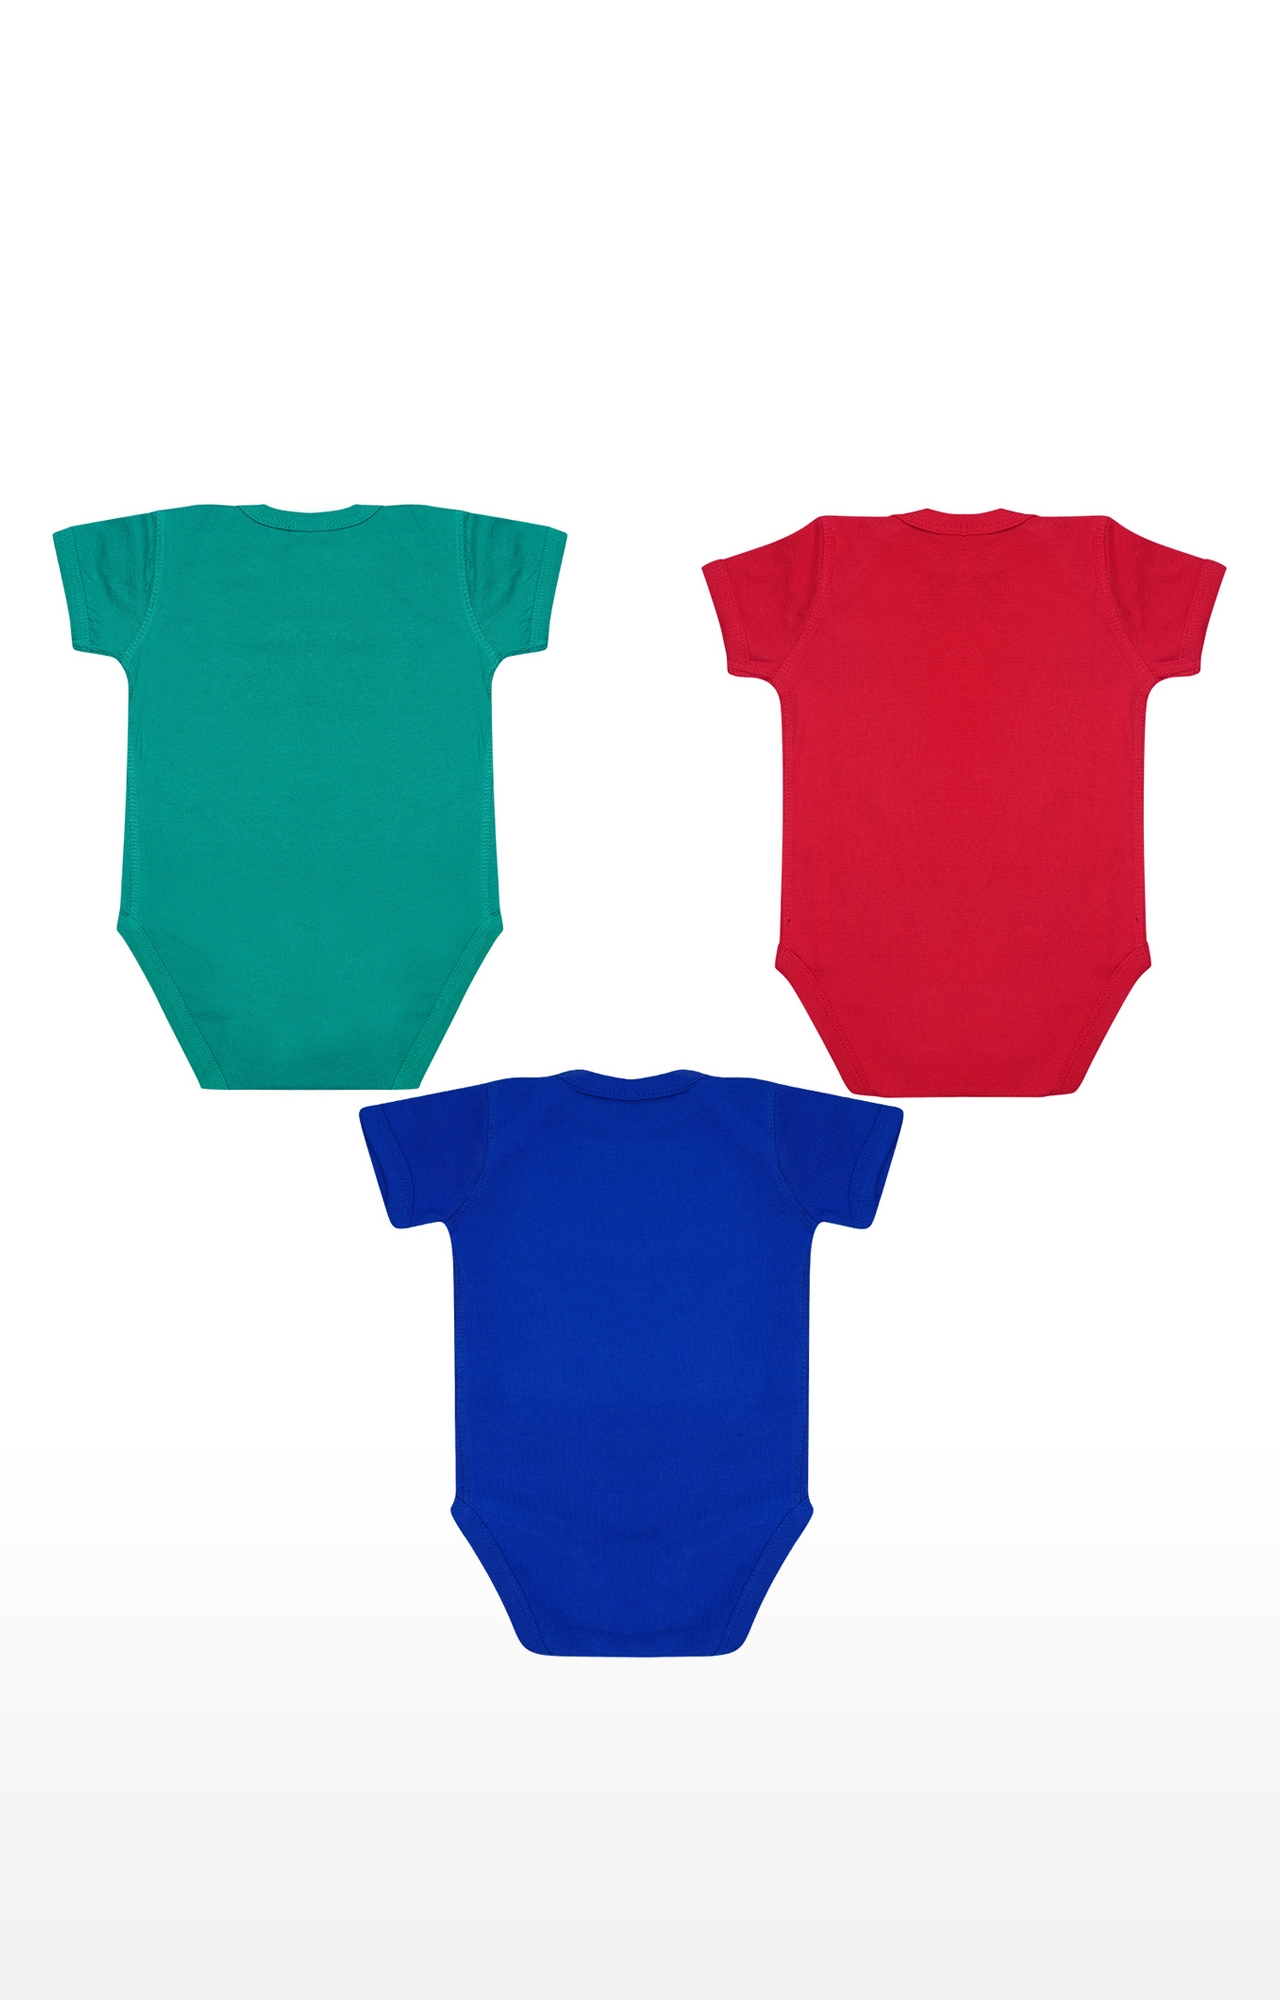 Popsicles Clothing | Popsicles Soft Cotton Comfort fit Round Neck Short Sleeves Unisex Baby Romper -  Blue, Green and Red (0-3M) 1